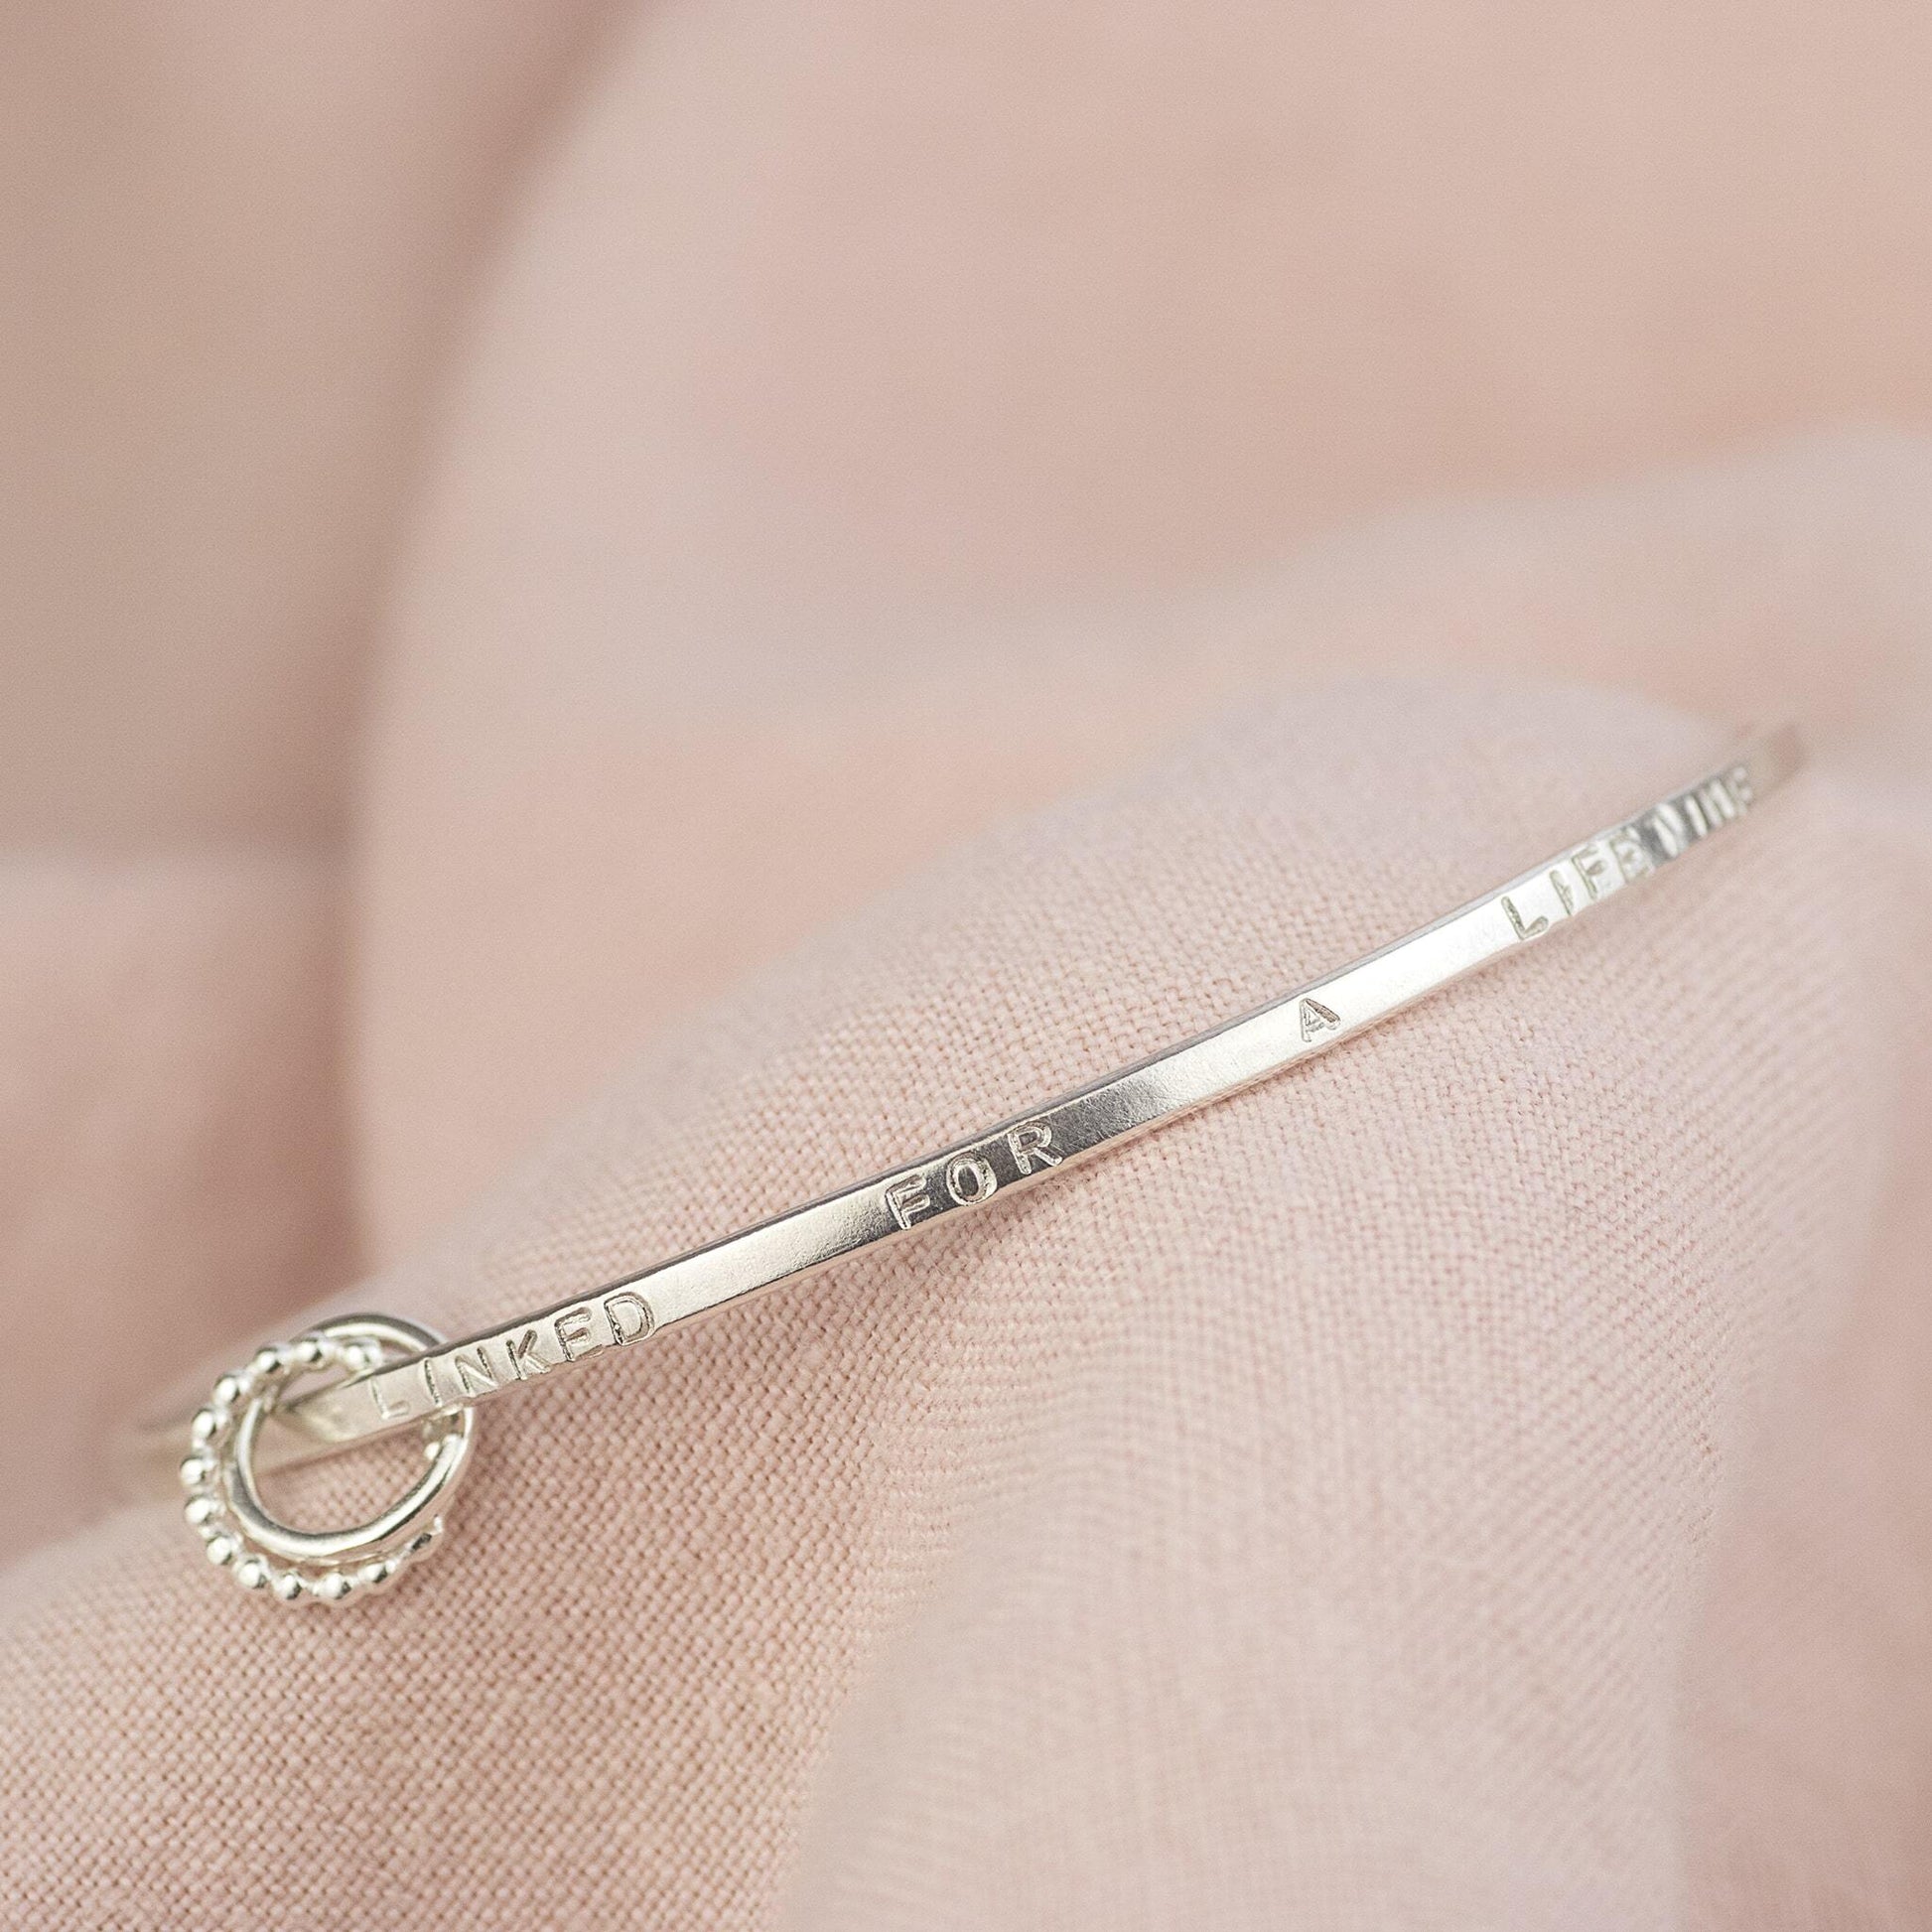 Personalised Friends Bangle - Linked for a Lifetime - Hand Stamped with Names or Words